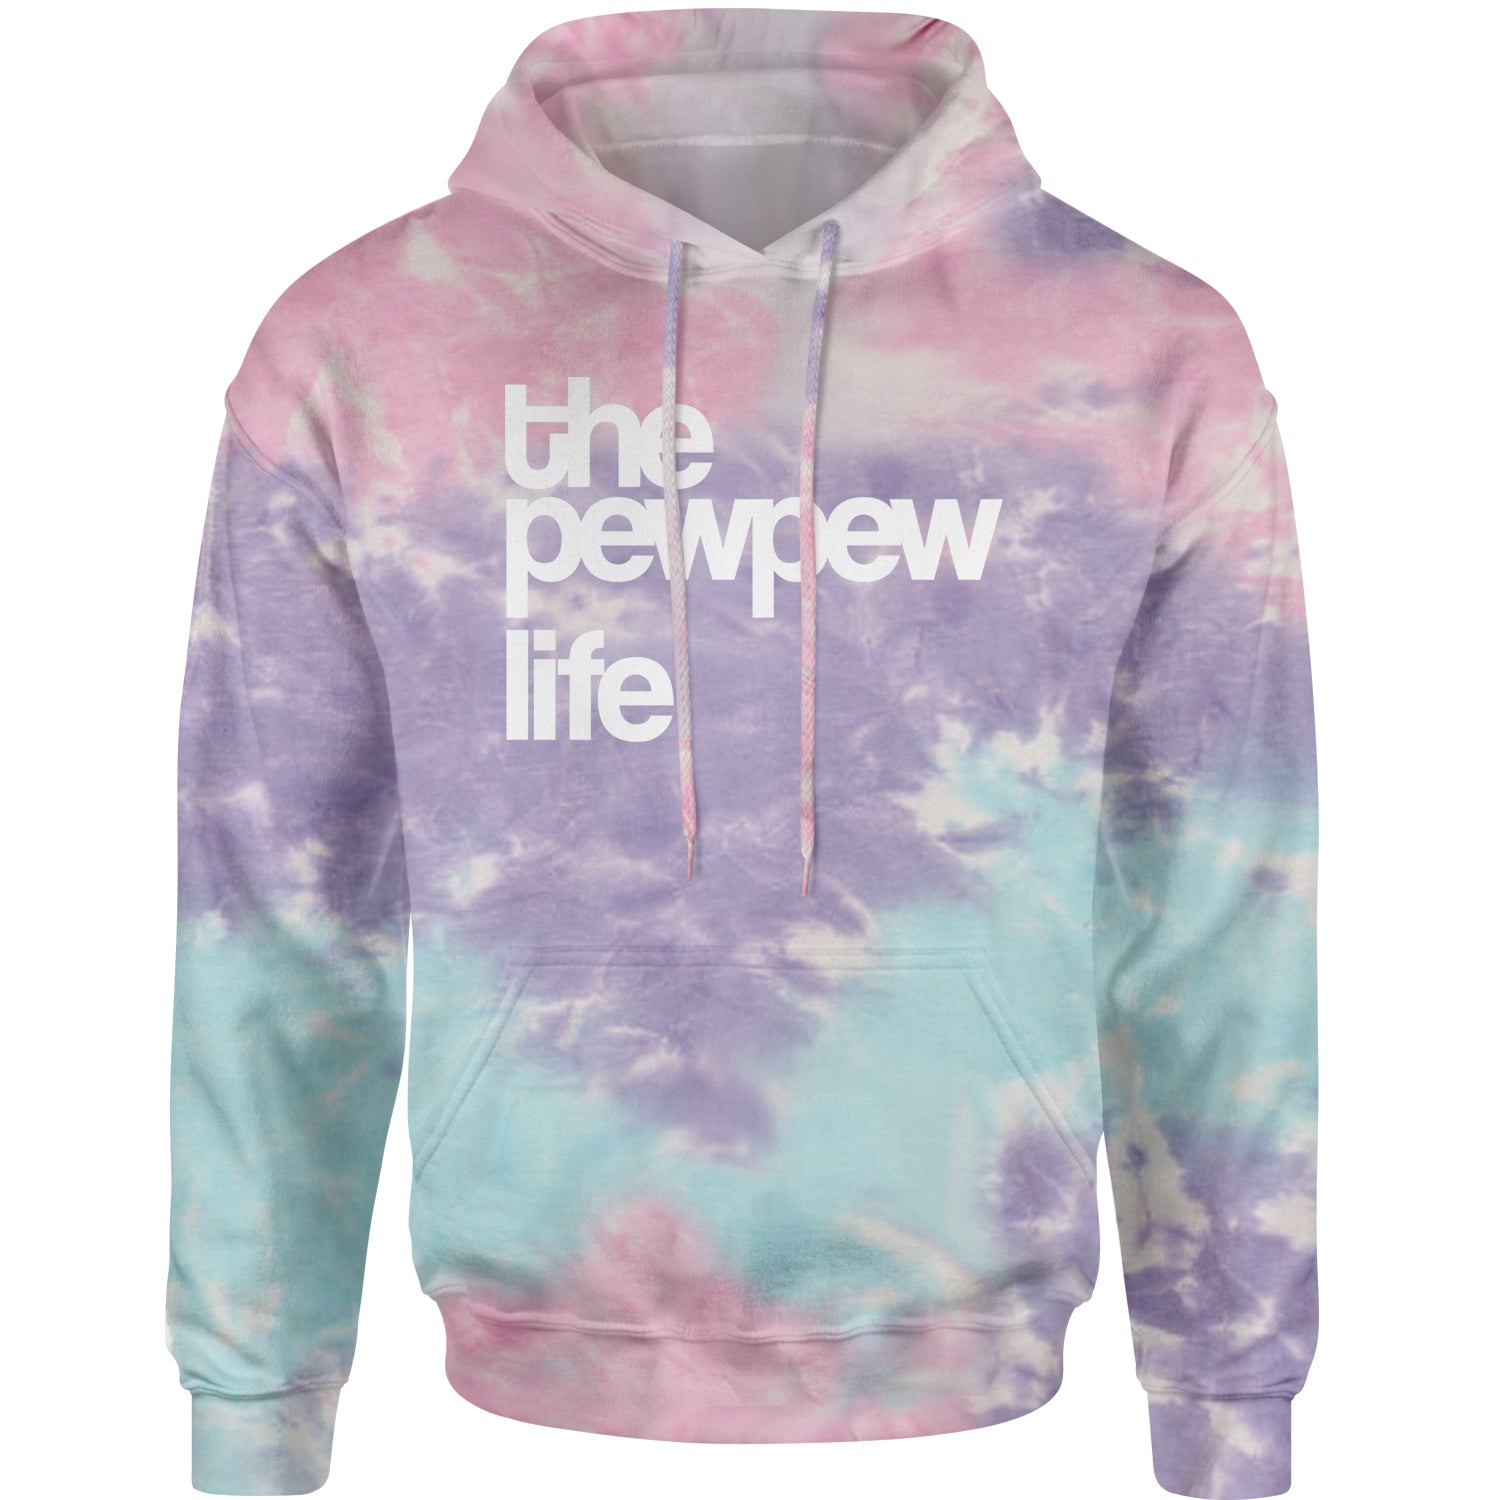 The PewPew Pew Pew Life Gun Rights Adult Hoodie Sweatshirt #expressiontees by Expression Tees